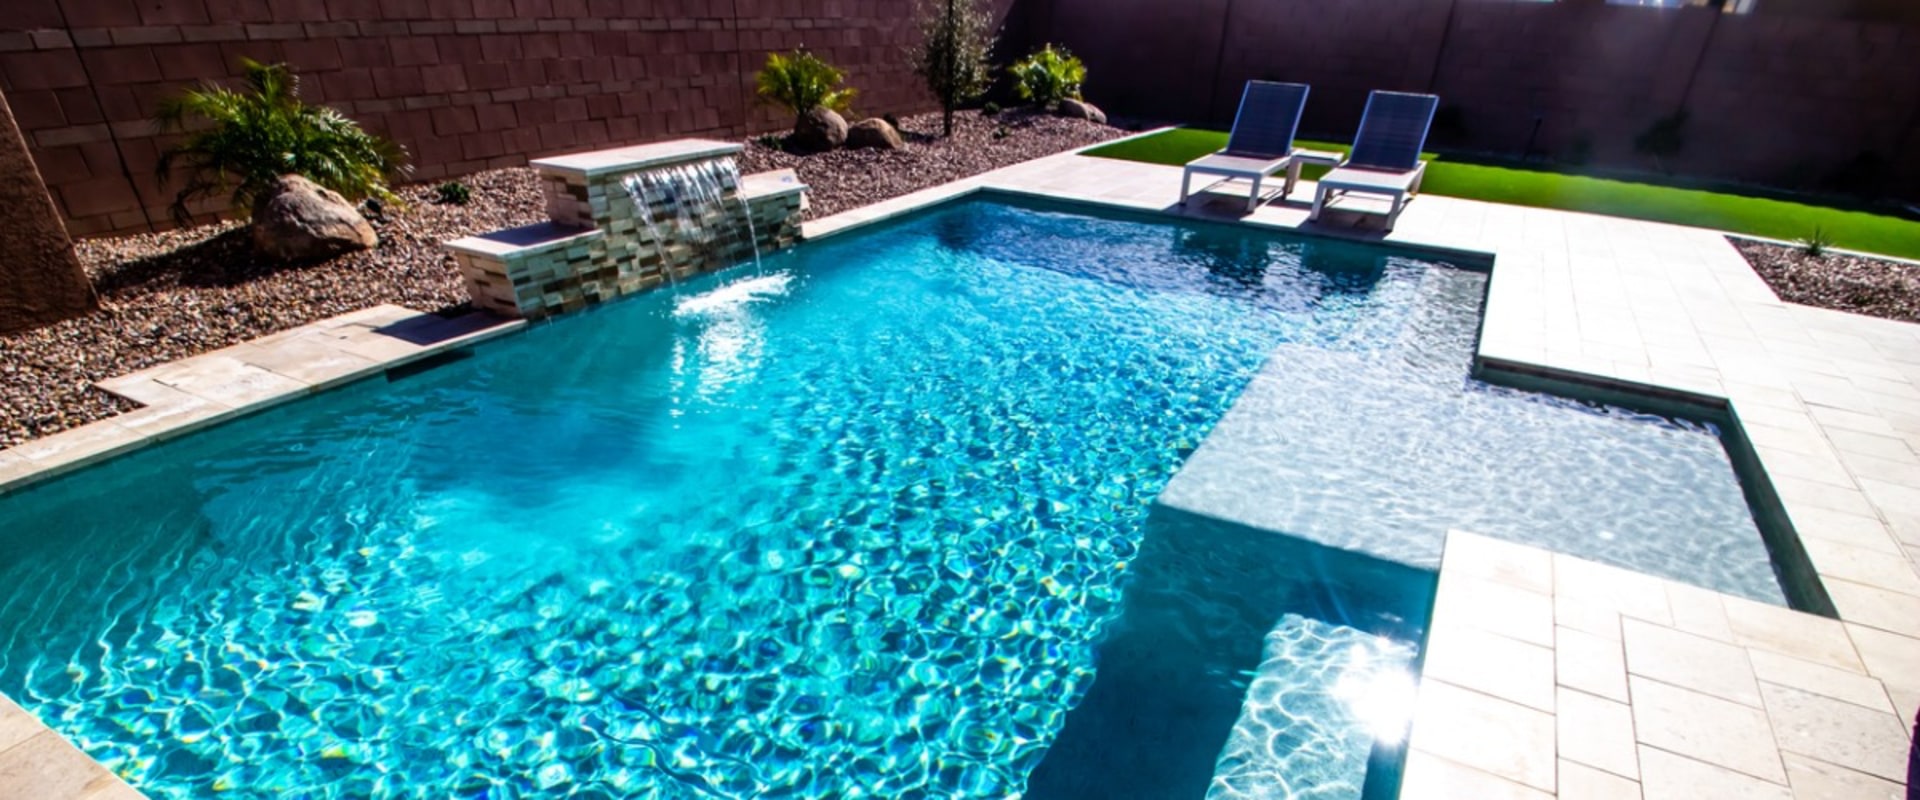 The Benefits Of Hiring Professional Pool Installation Companies In Paterson, NJ, For Concrete Pool Repair